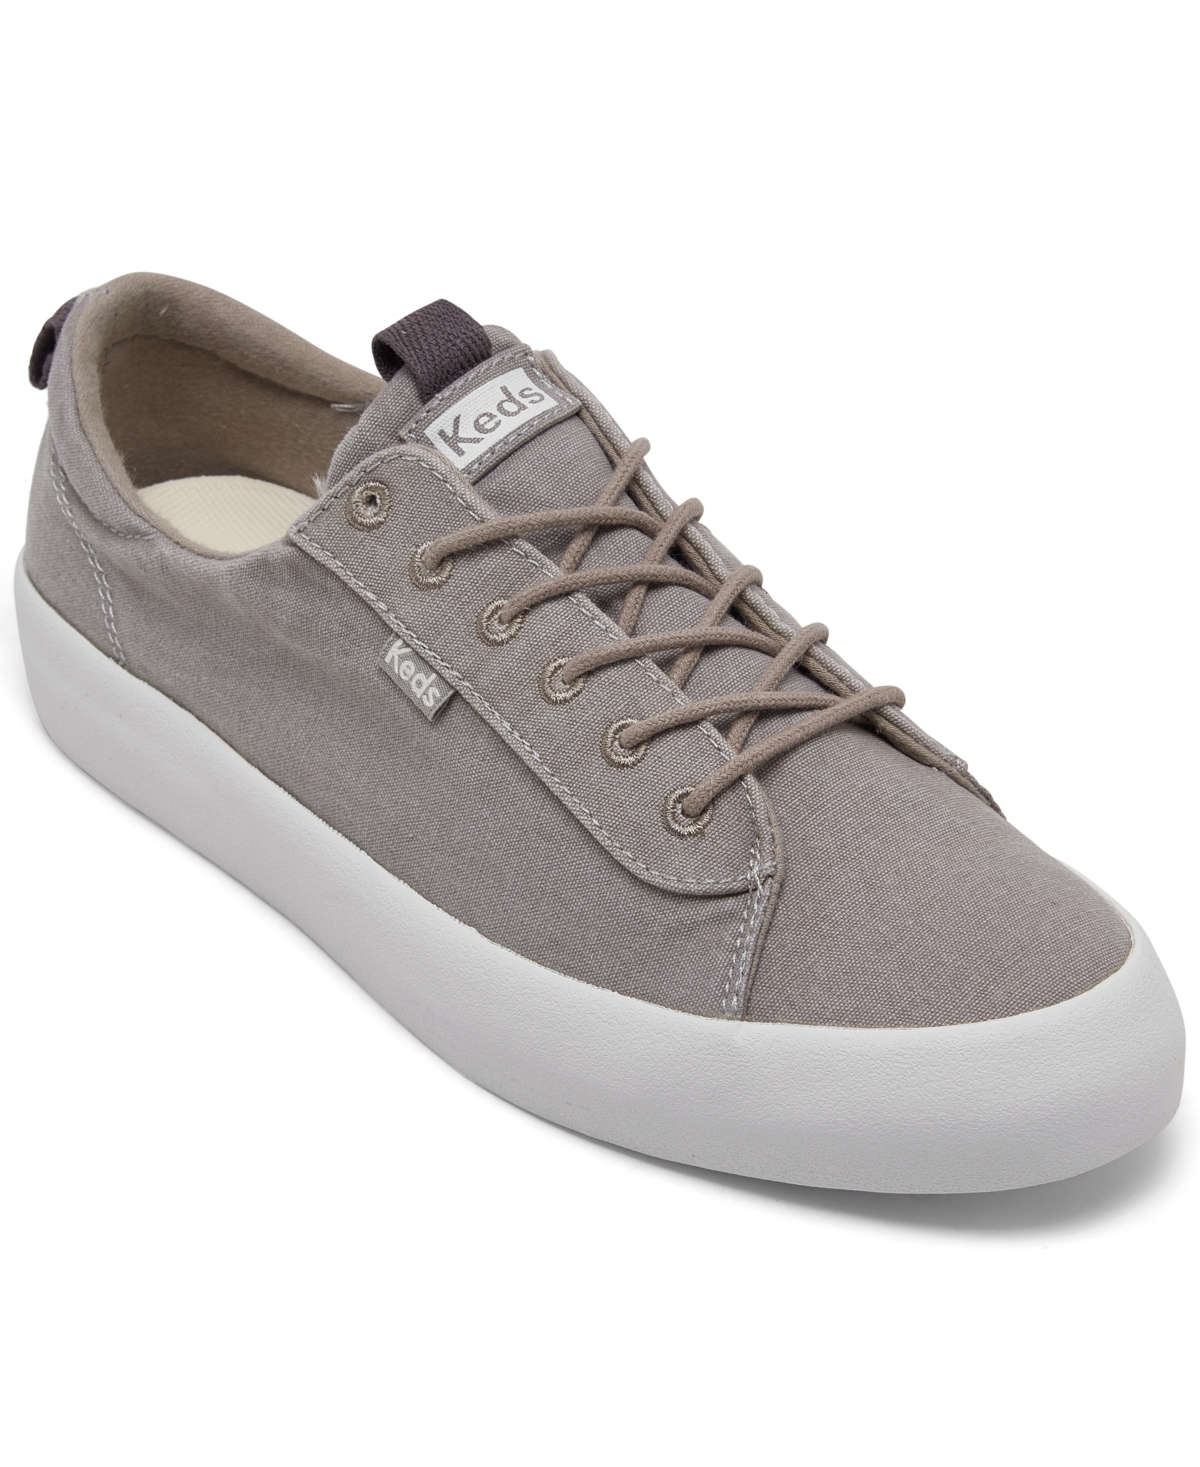 Women's Kickback Canvas Casual Sneakers from Finish Line - Gray